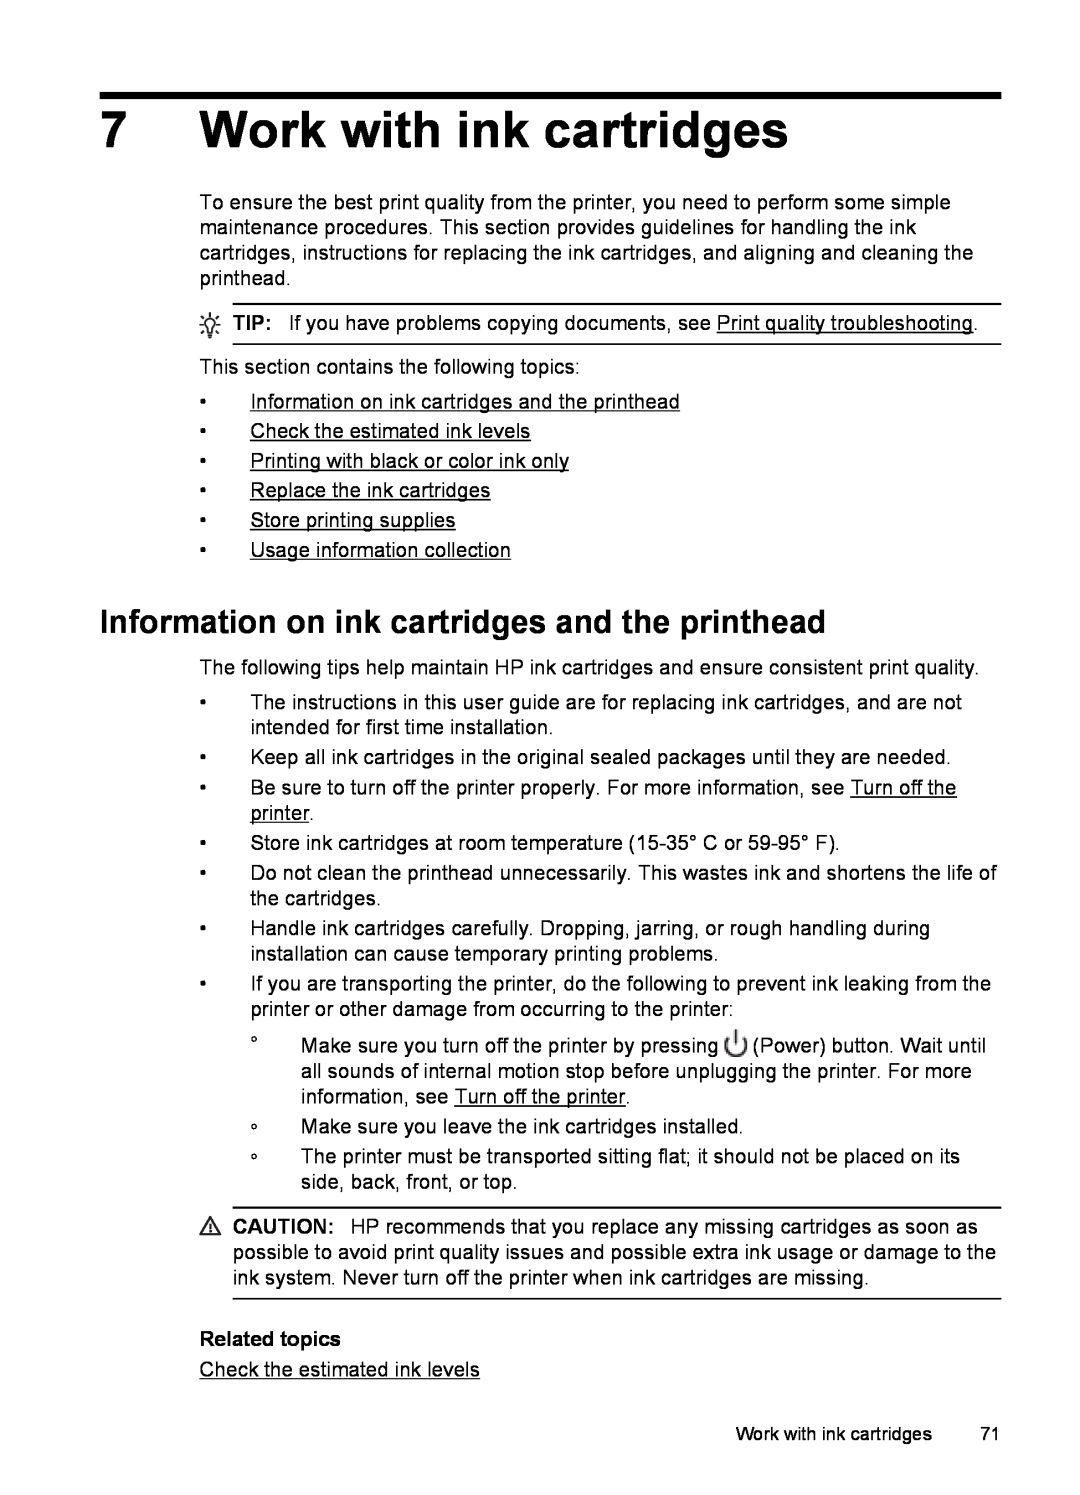 HP 6600 - H7 manual Work with ink cartridges, Information on ink cartridges and the printhead, Related topics 